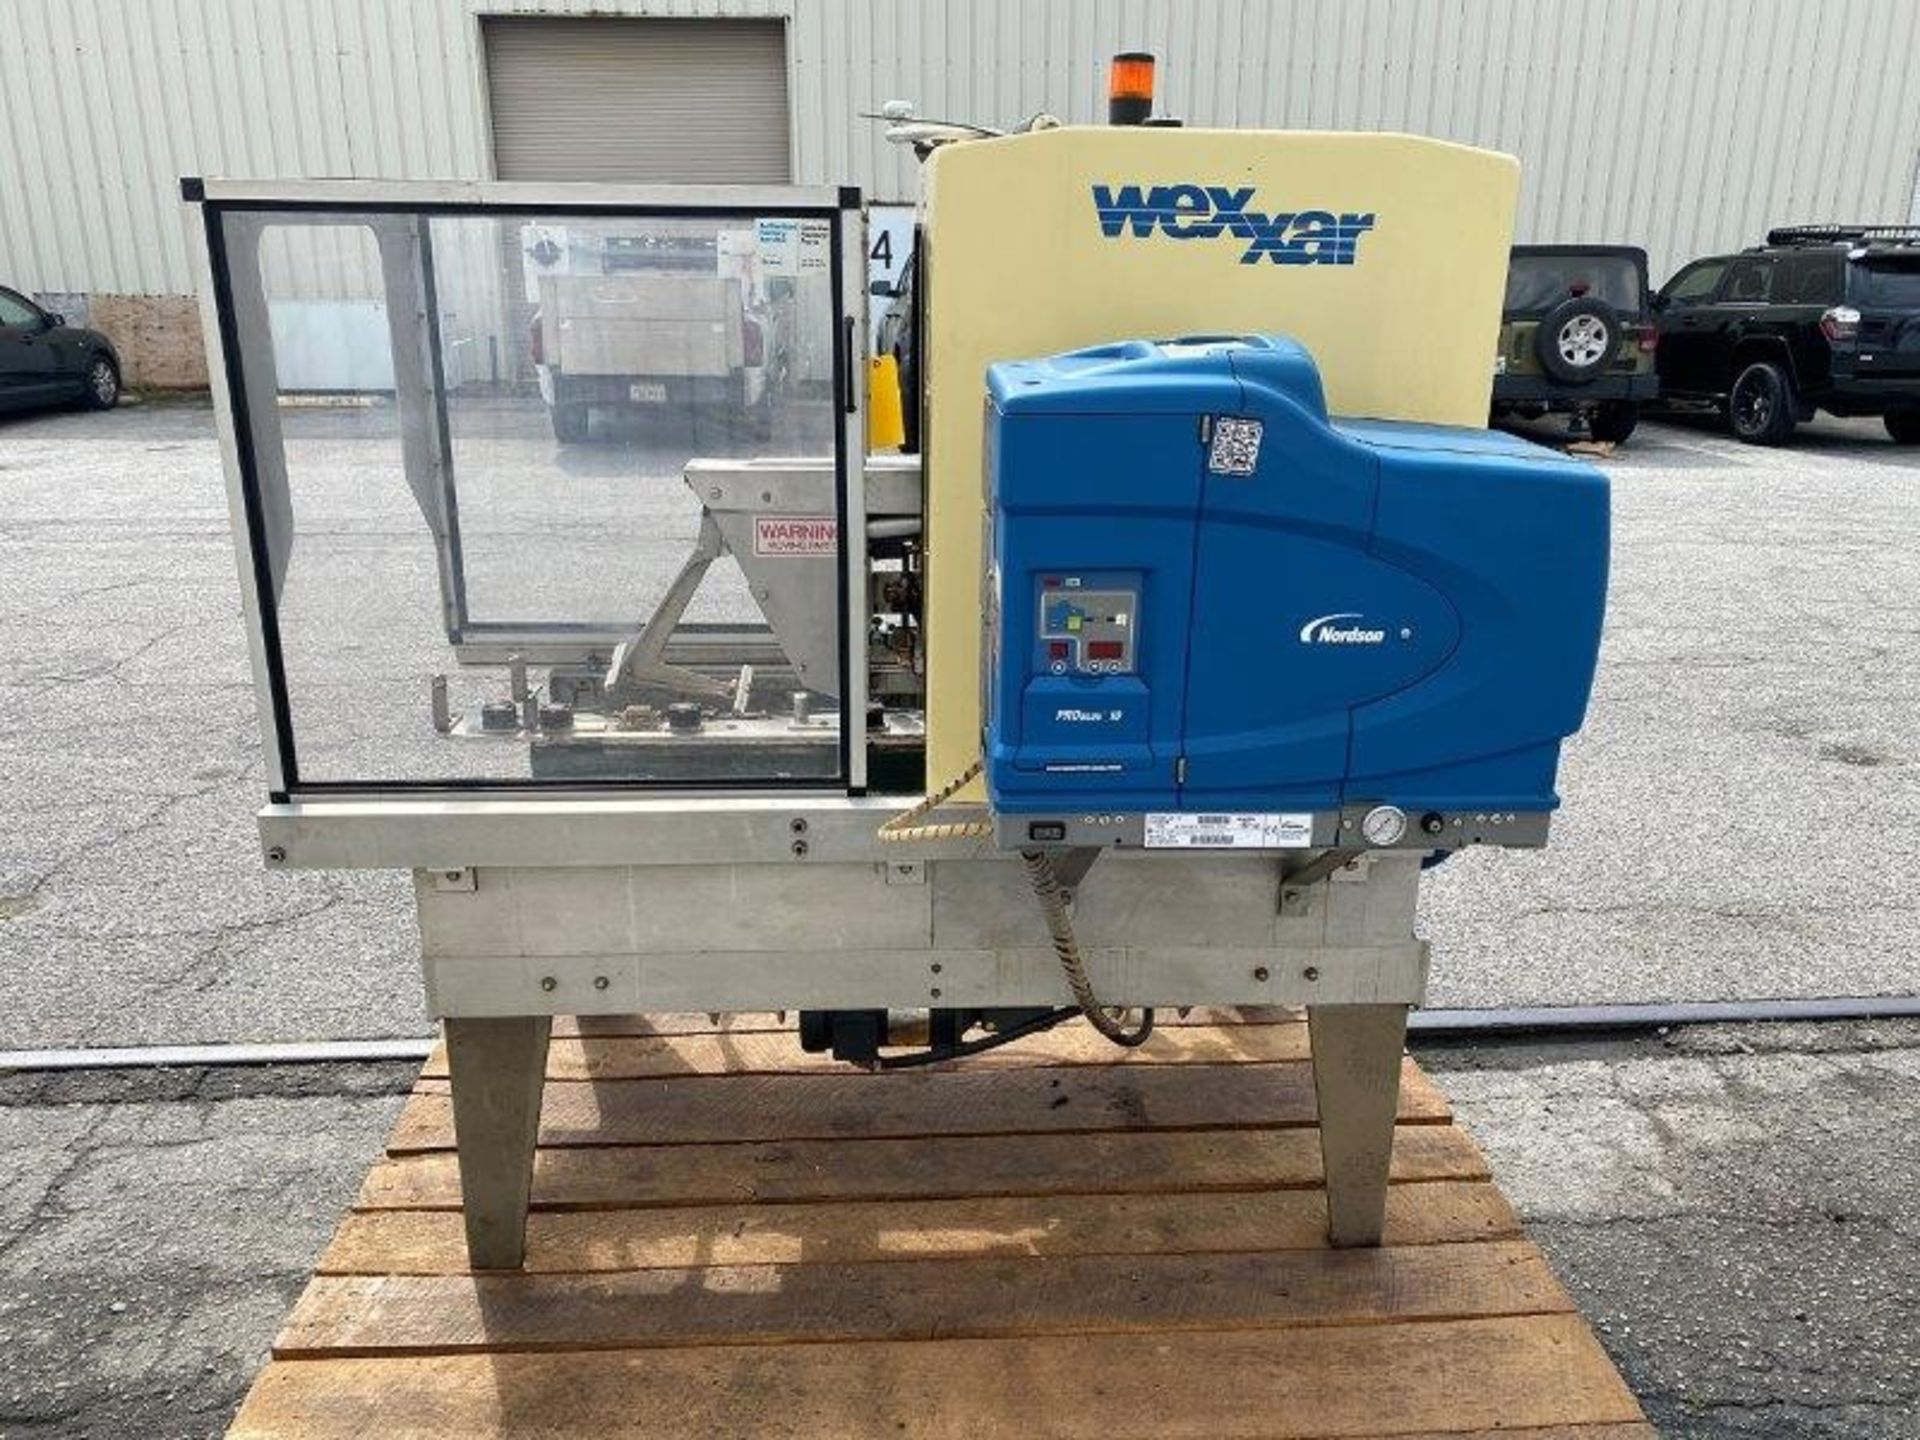 WEXXAR Top Case Sealer, Model TS-6, S/N 186-C with newer Nordson ProBlue 10 Hot Melt Glue; Model